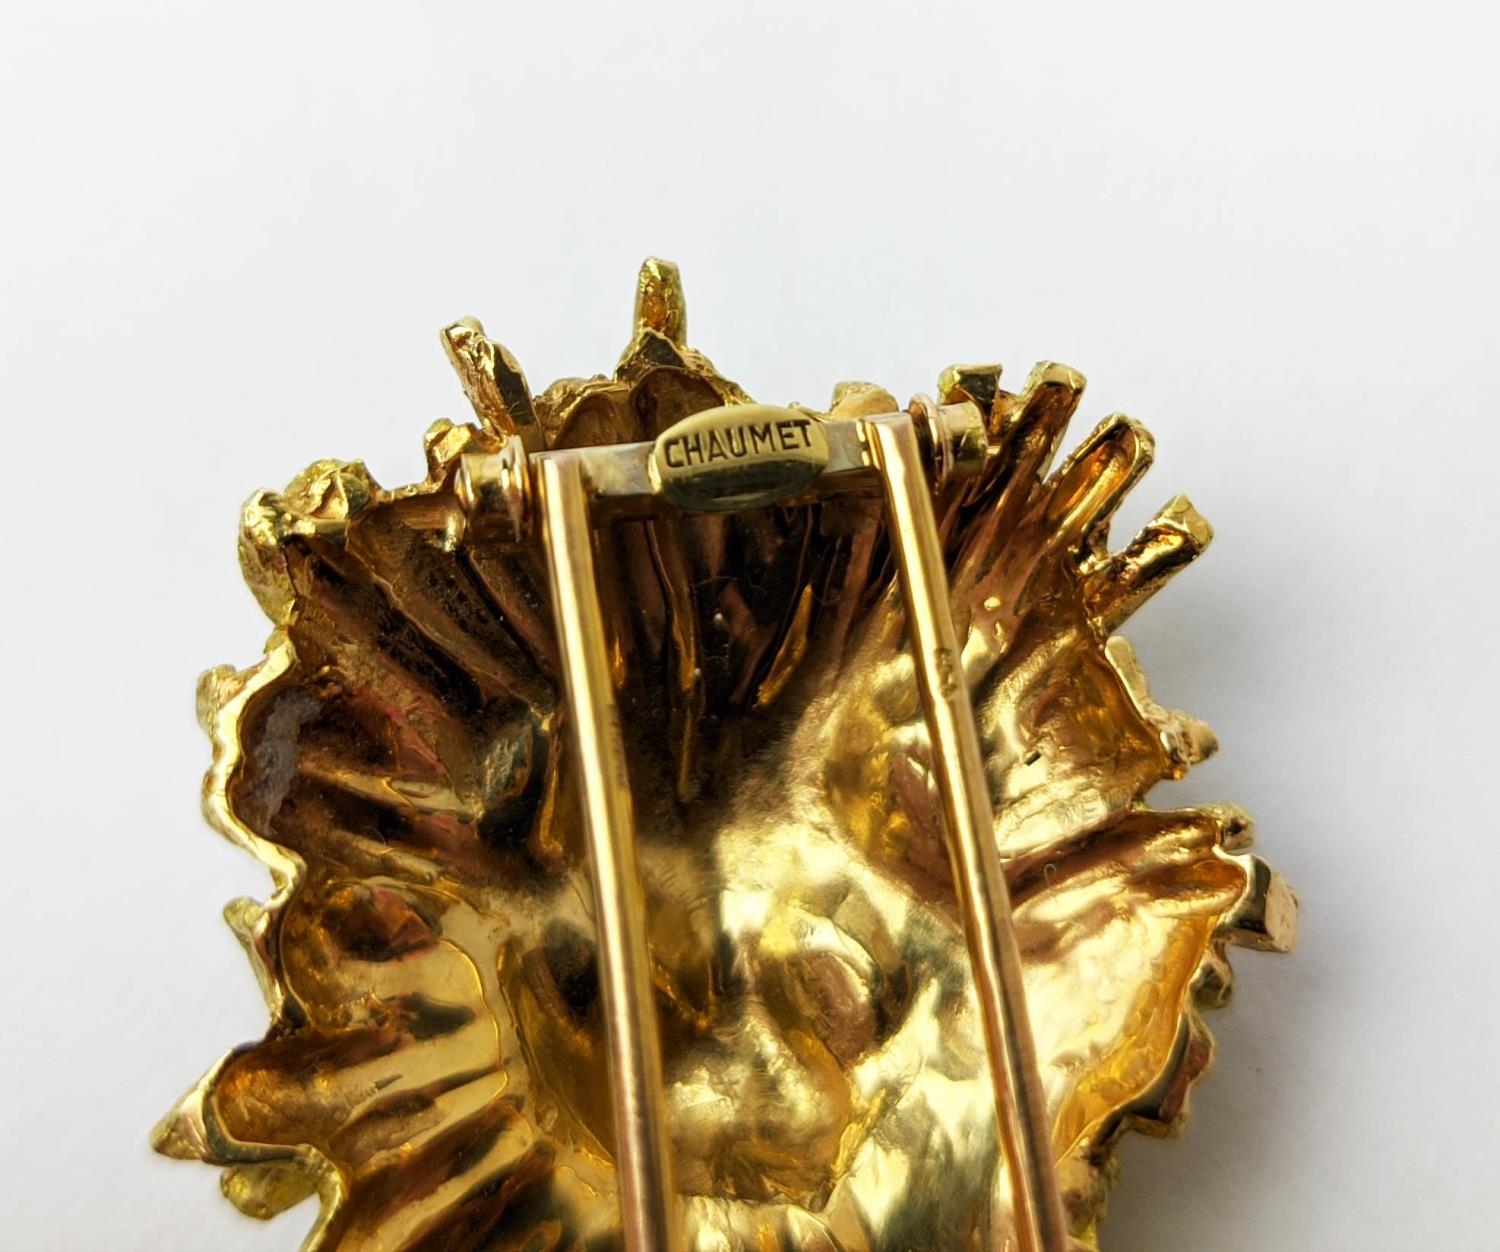 AN 18CT GOLD 'CHAUMET' LION BROOCH, textured finish, made in parts, 33.38 grams, probably 1970s. - Image 7 of 9